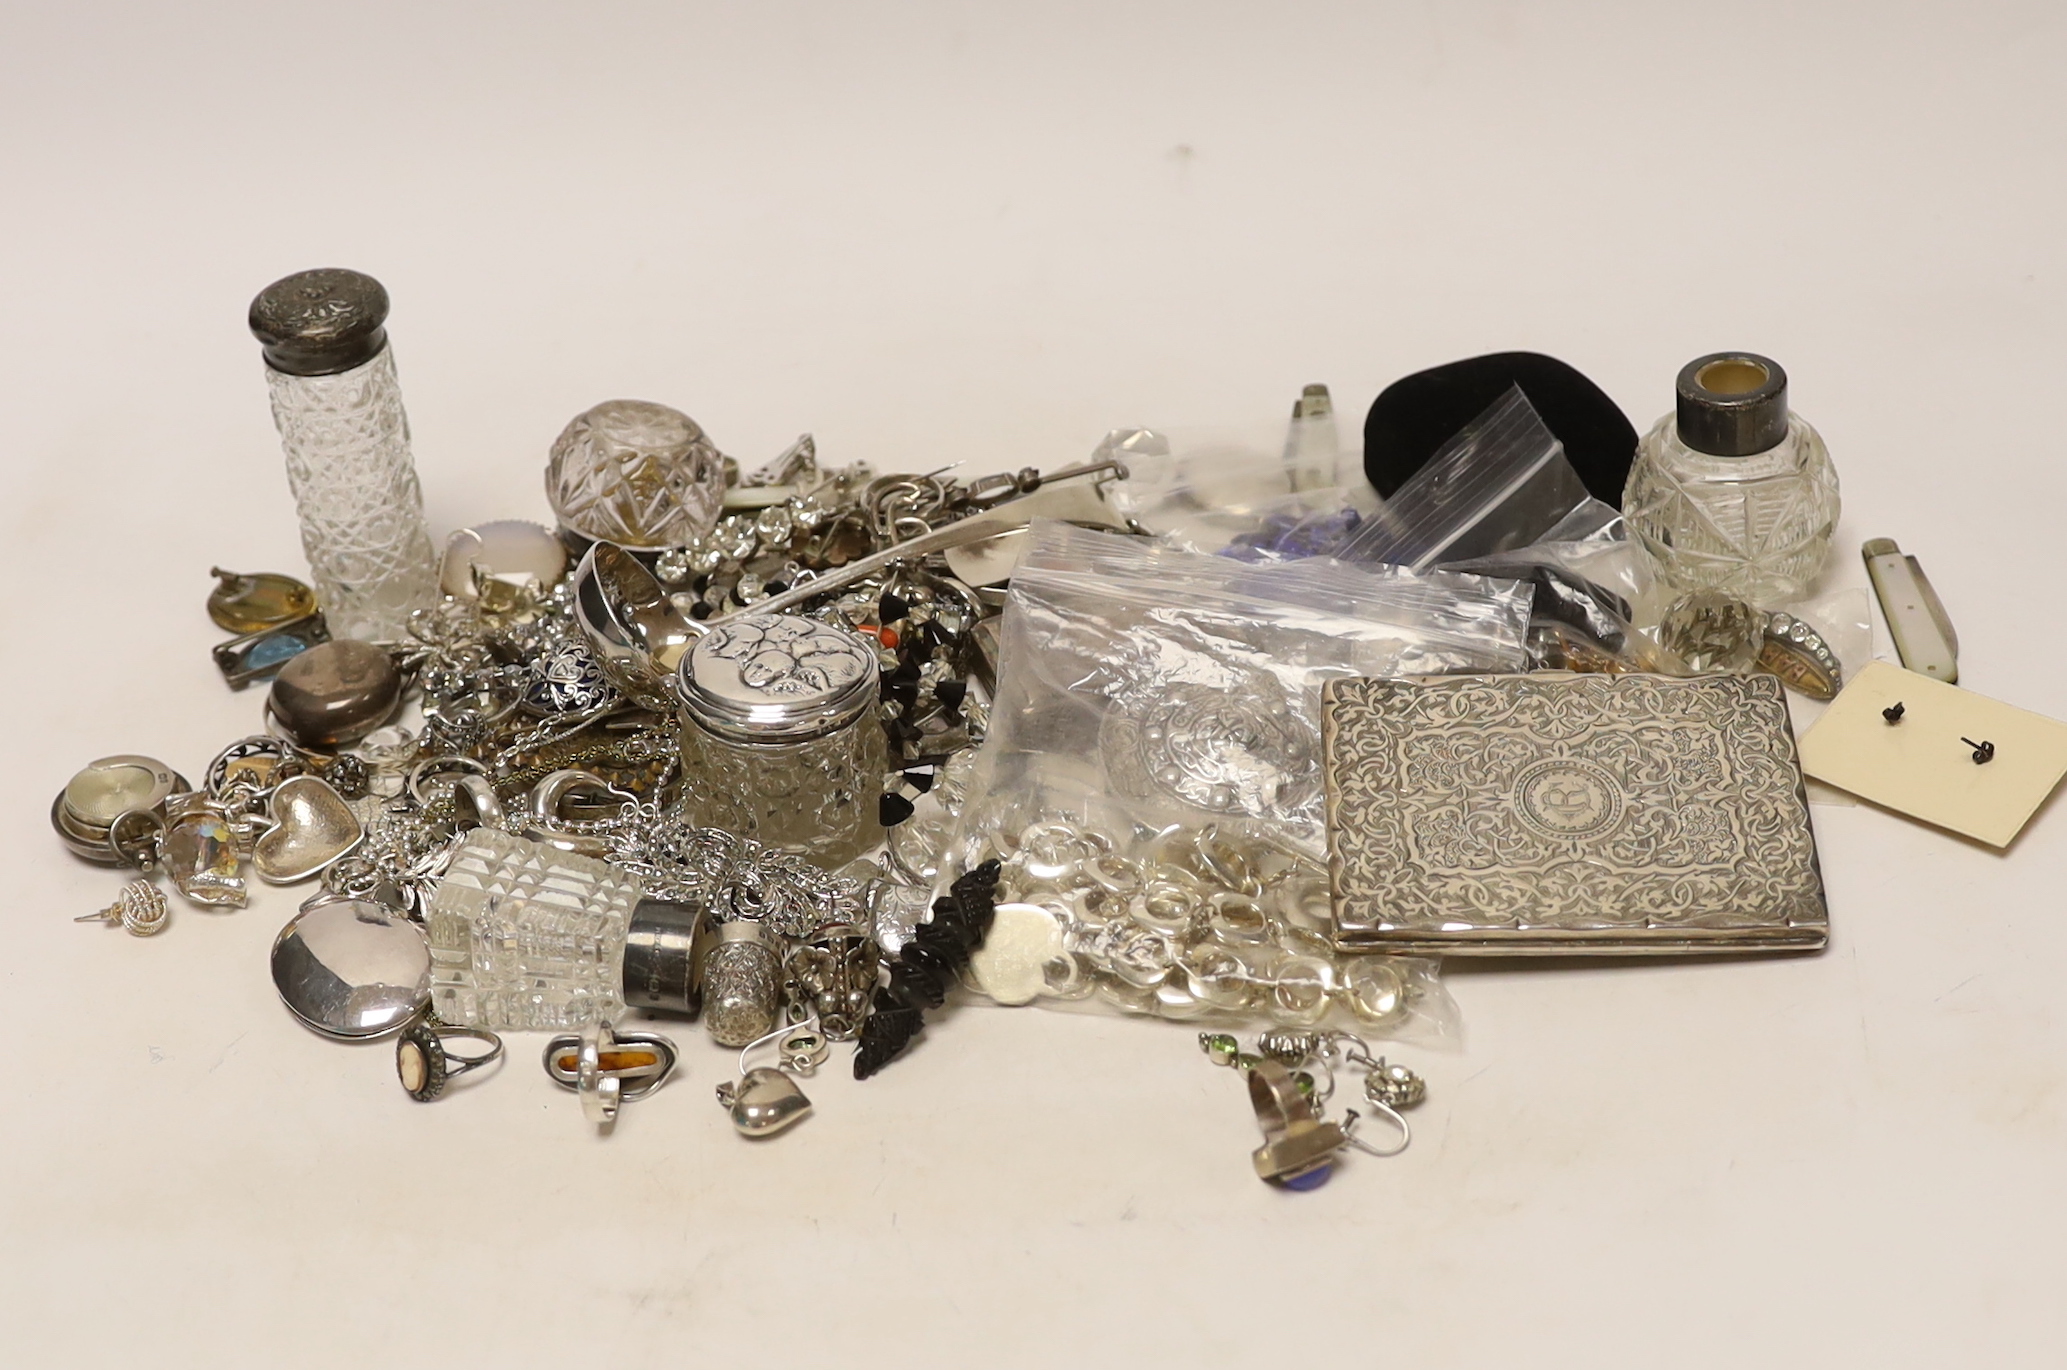 A group of assorted silver and jewellery, including a 19th century snuff box, sifter spoon and card case, a later toilet jar, scent bottle and sovereign case, necklaces, earrings and lockets including white metal and oth